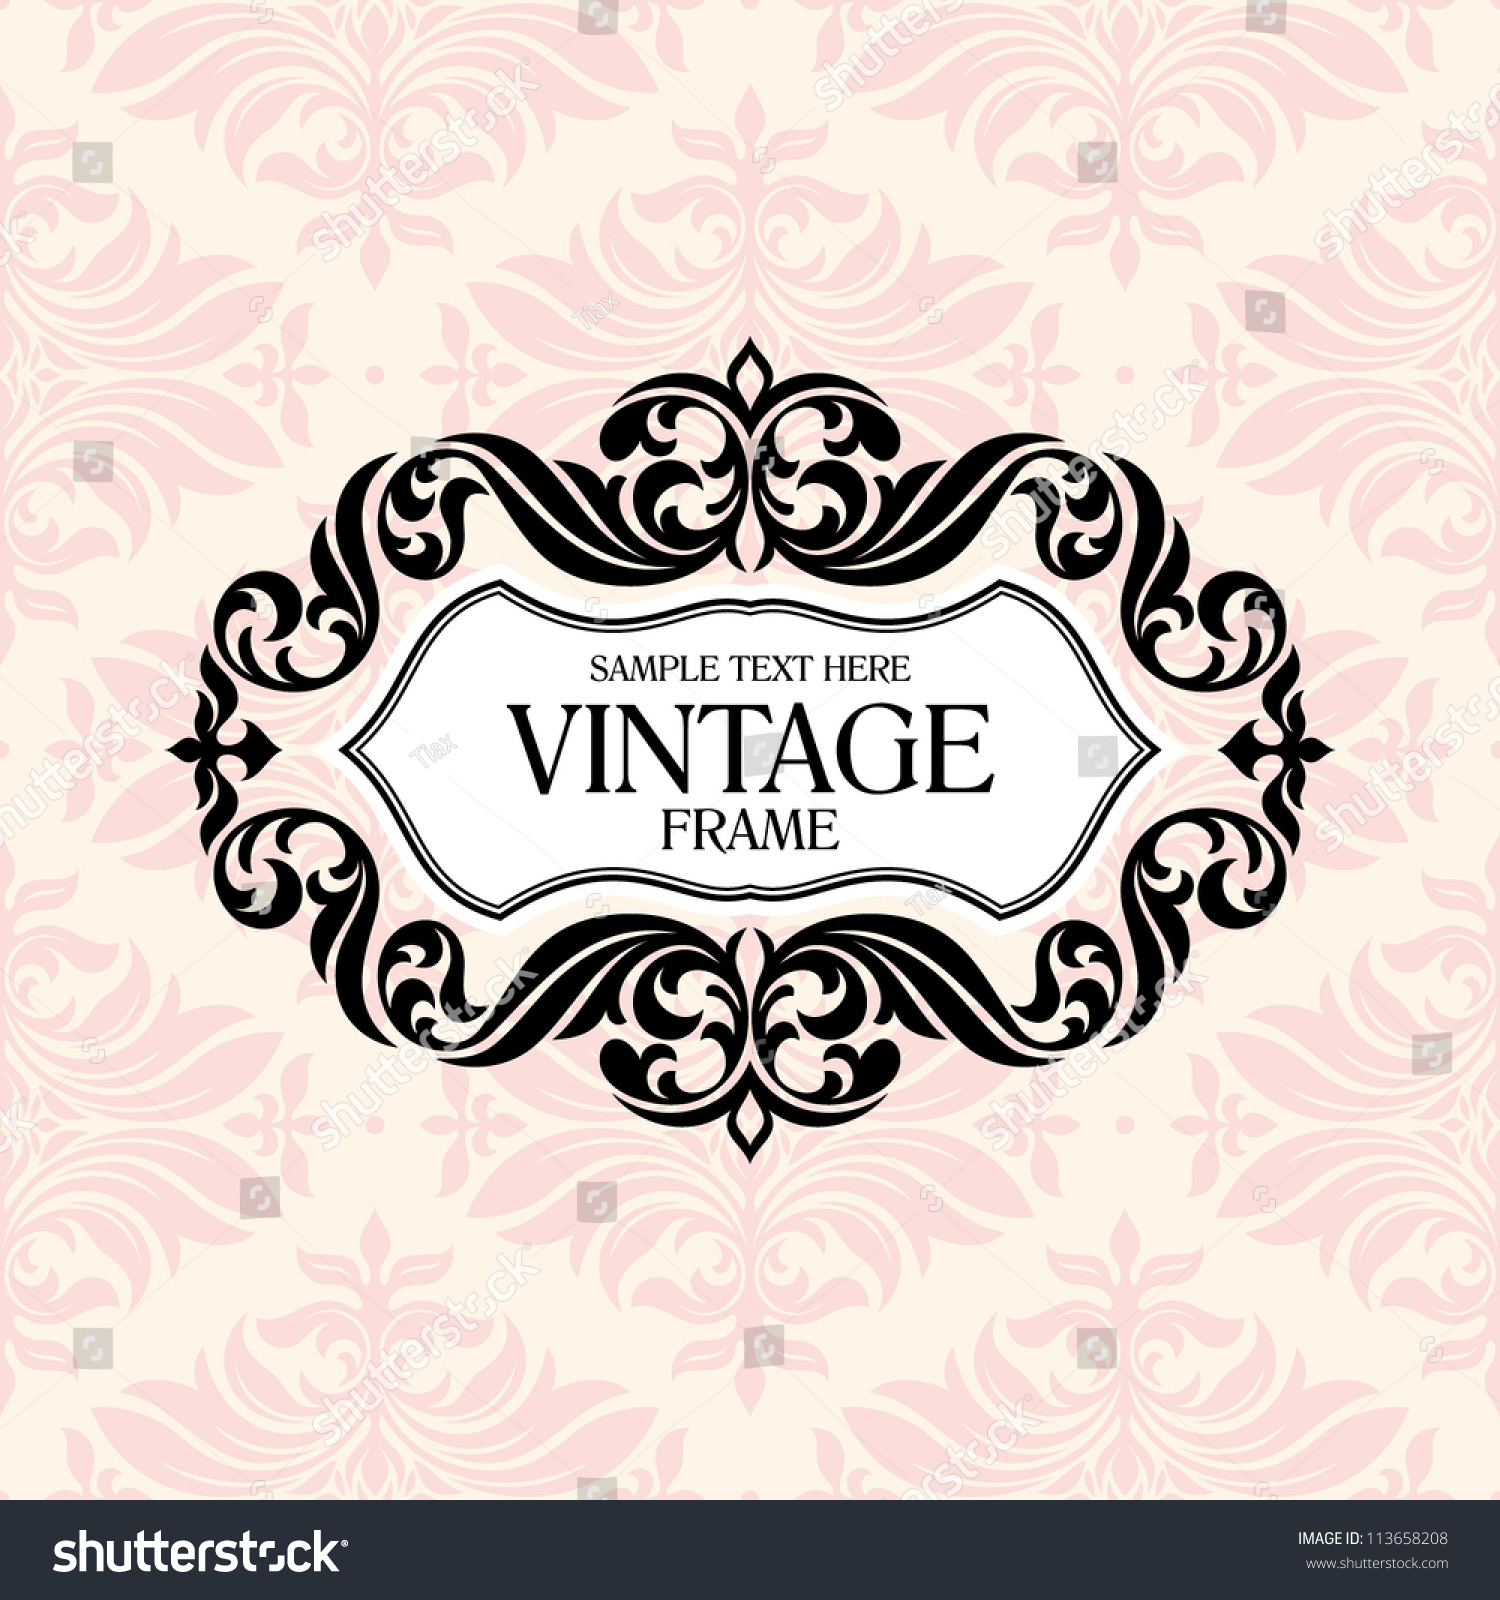 Abstract Vintage Frame Vector Illustration Stock Vector Royalty Free